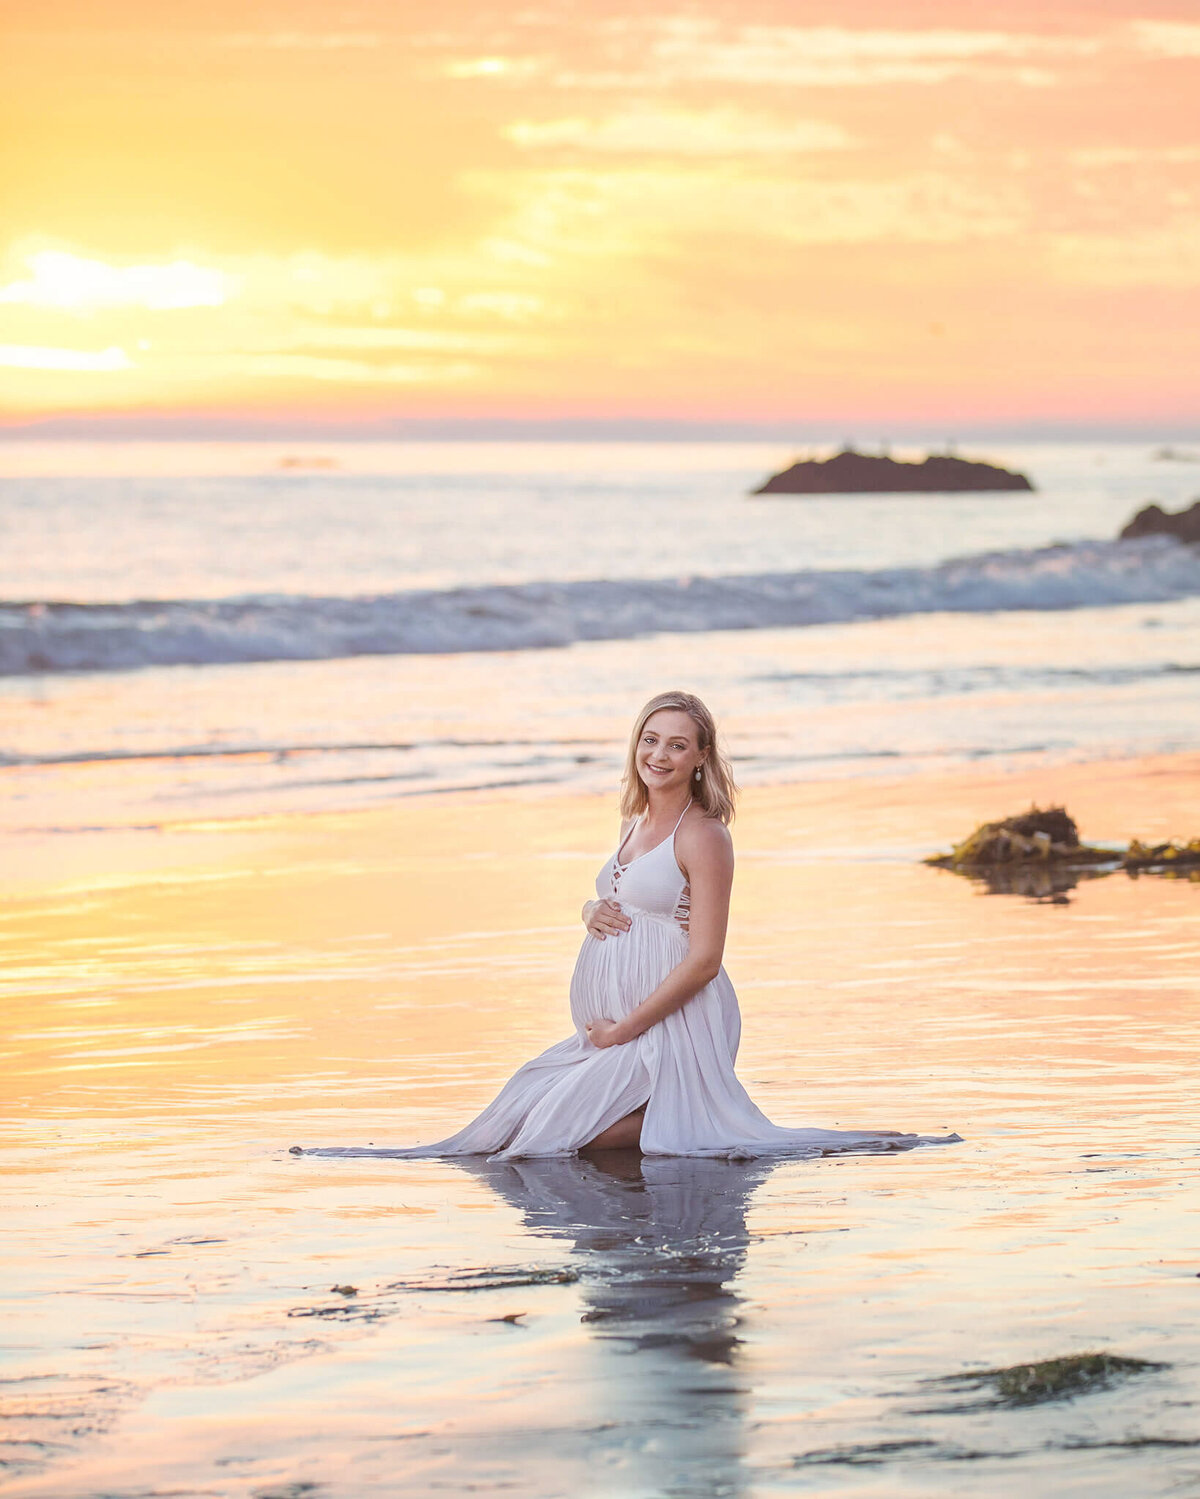 Maternity photoshoot at Malibu beach location by Los Angeles Maternity Photographer with new mom sitting on the sand with sun setting behind